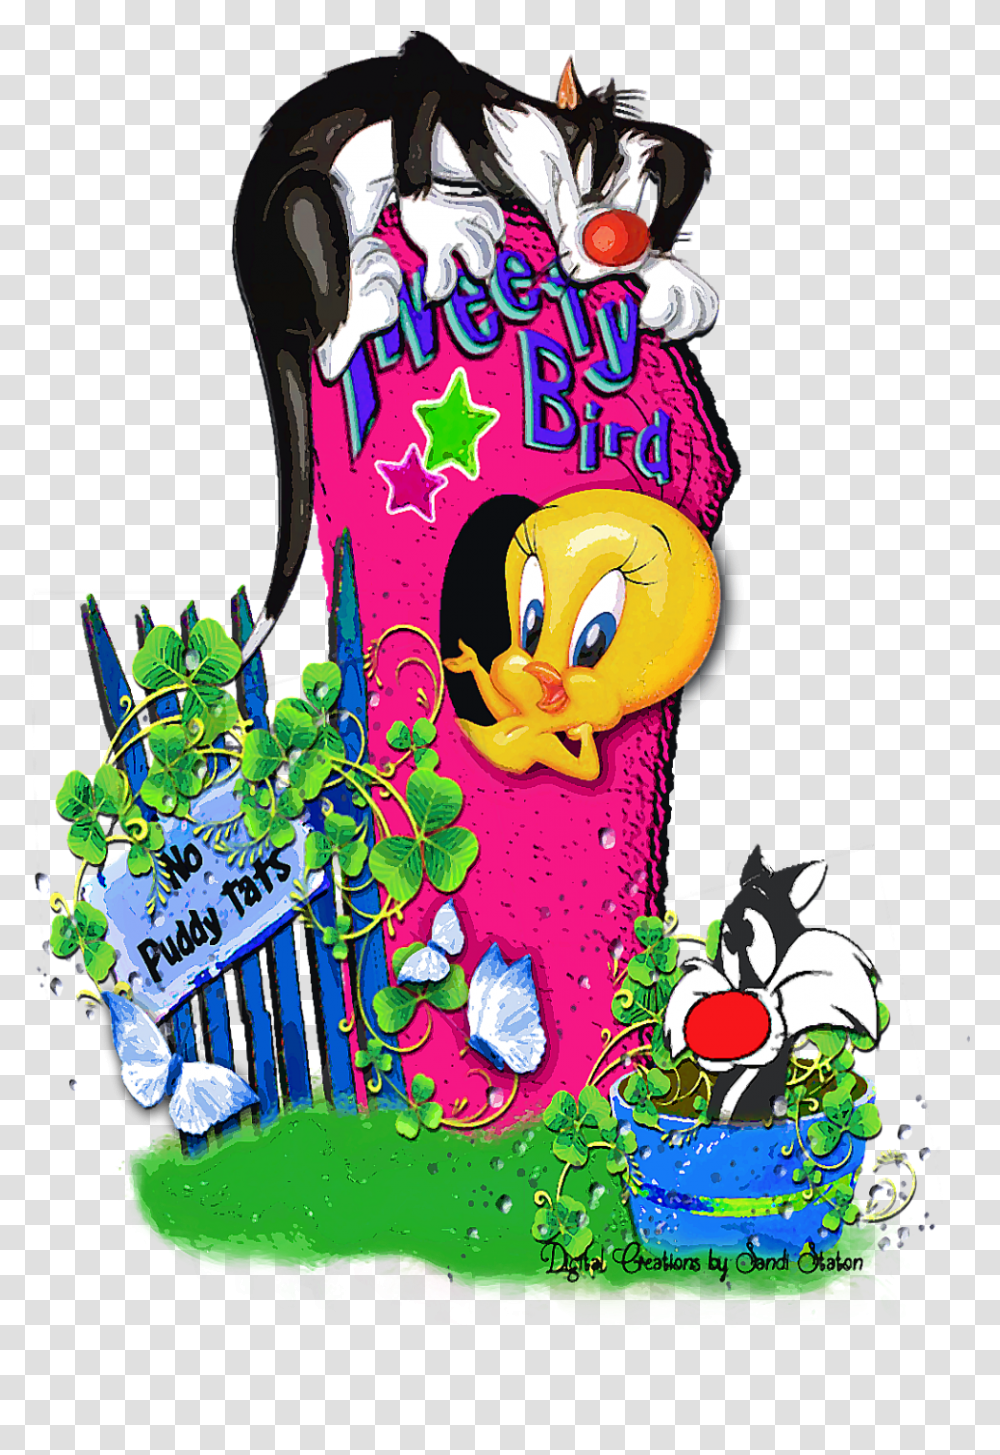 Sylvester The Cat Download Sylvester The Cat, Advertisement, Poster Transparent Png